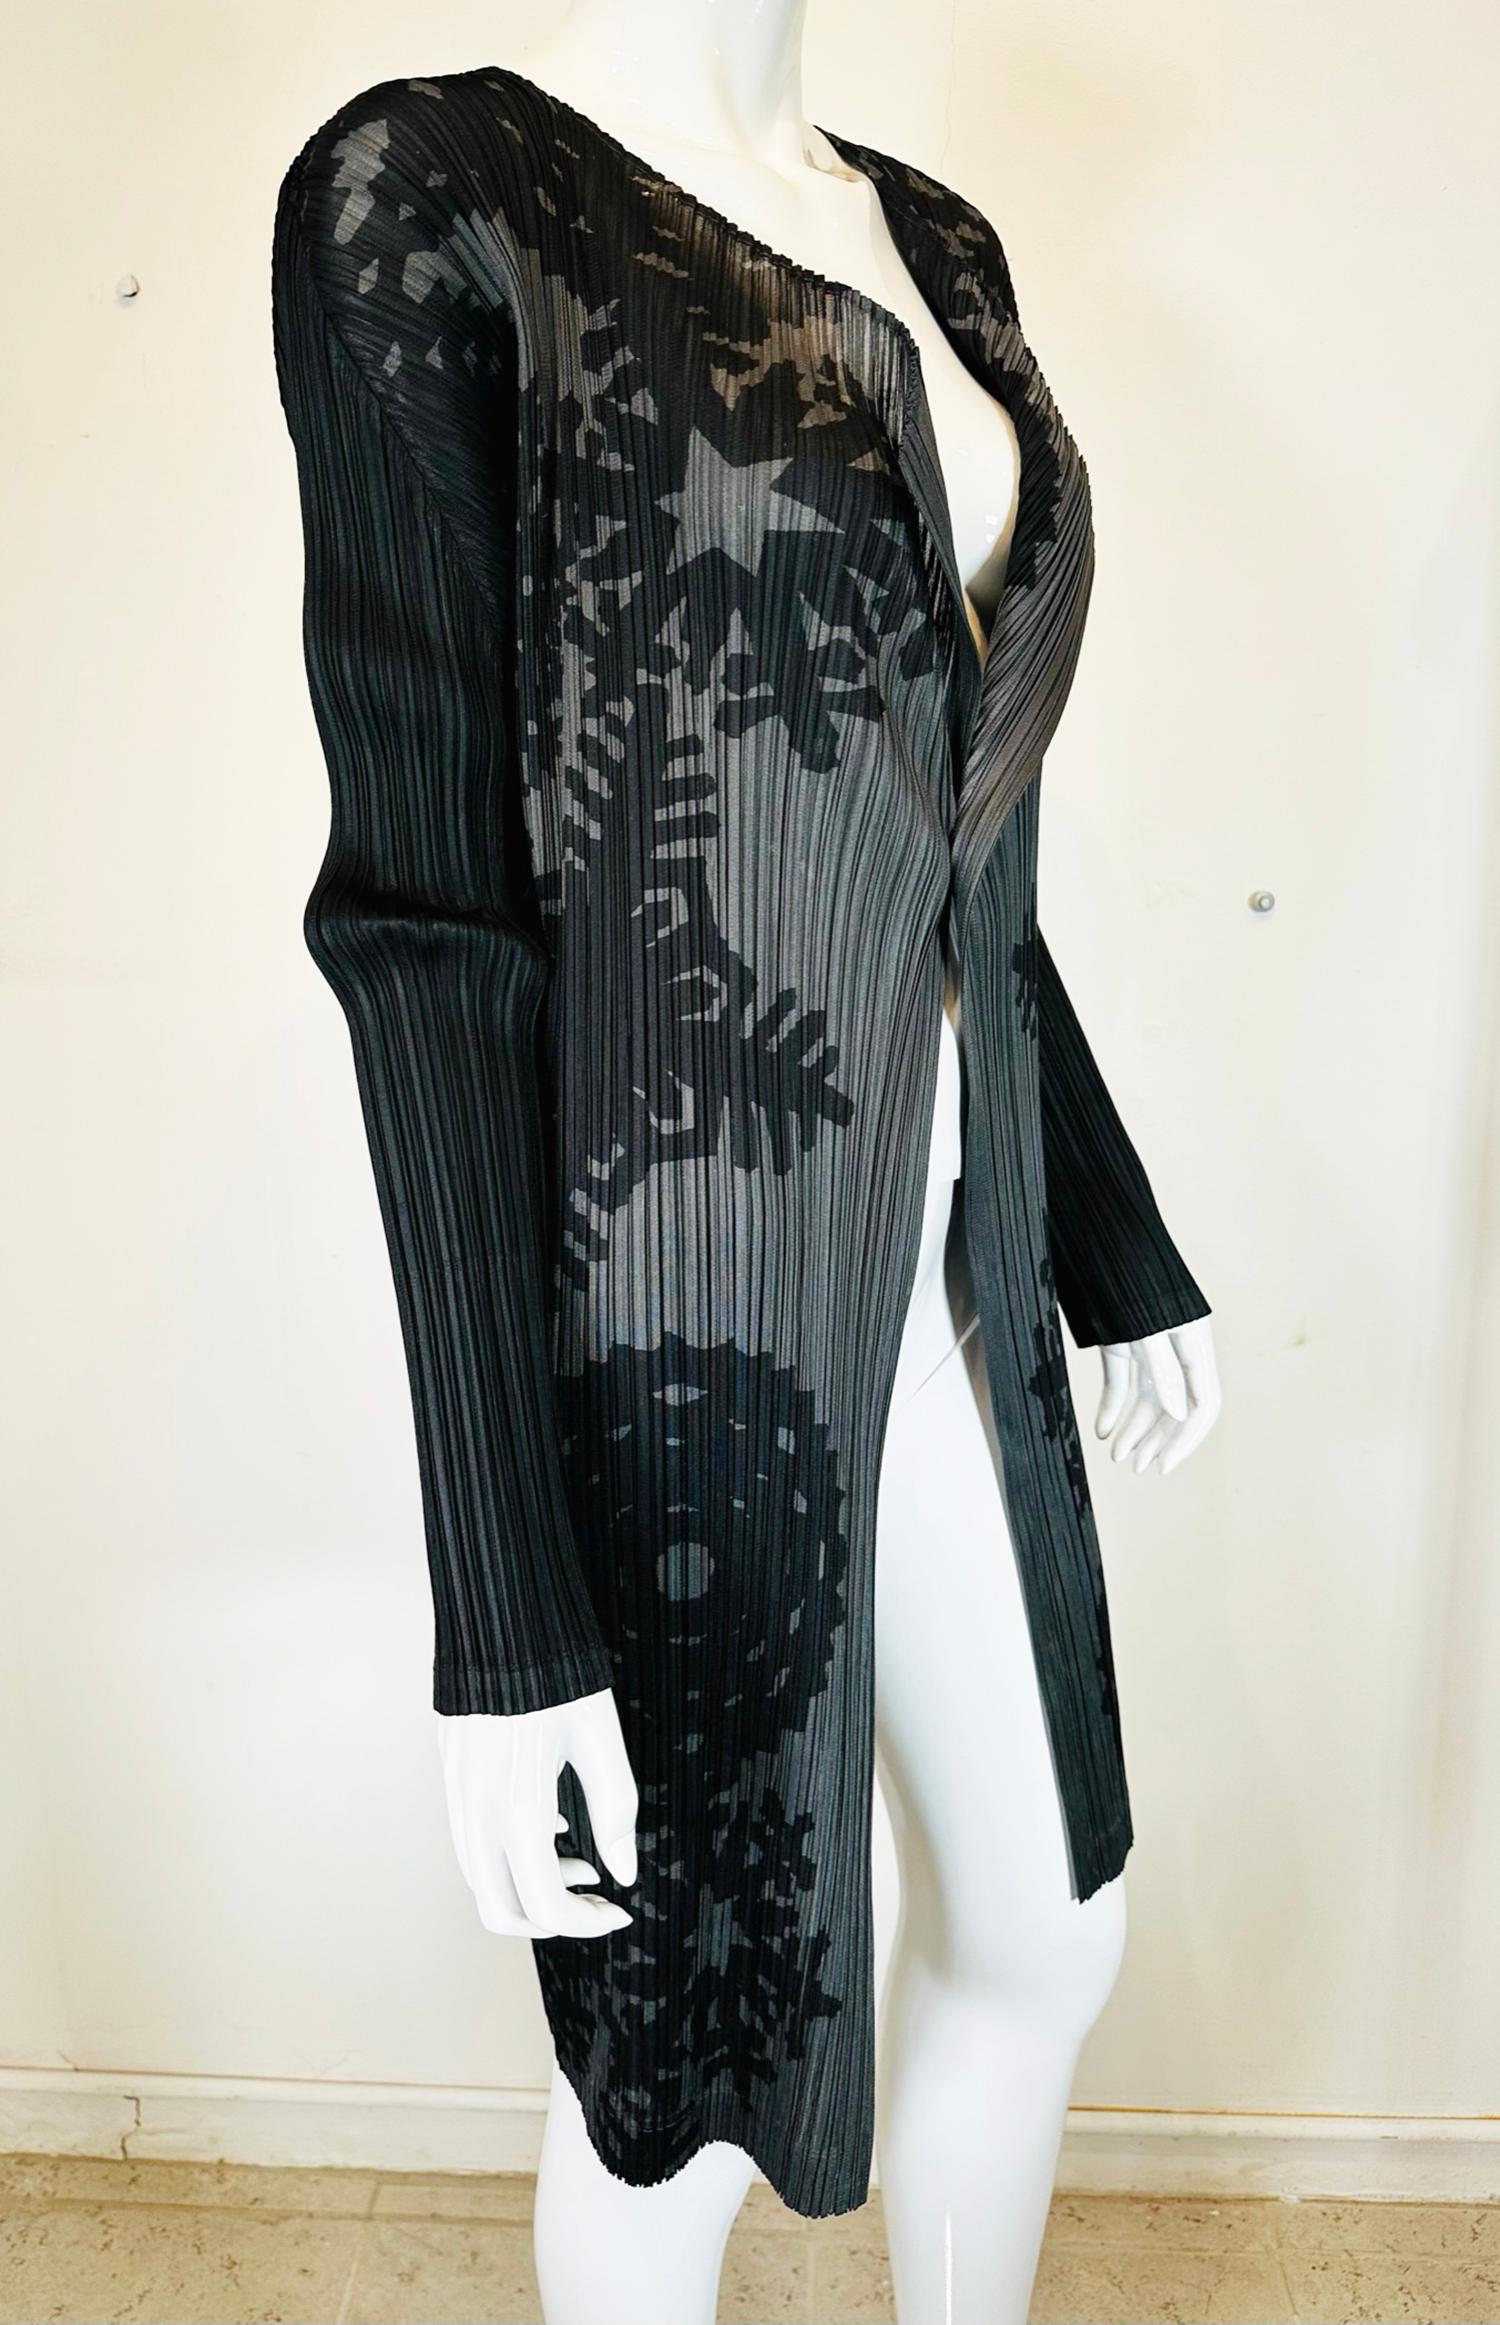 Issey Miyake Pleats Please black & grey printed design drop shoulder, long sleeve, open front coat with turn back collar/lapels. Great design, perfect layering piece. Fits like a size small/small medium
In excellent wearable condition.  All our